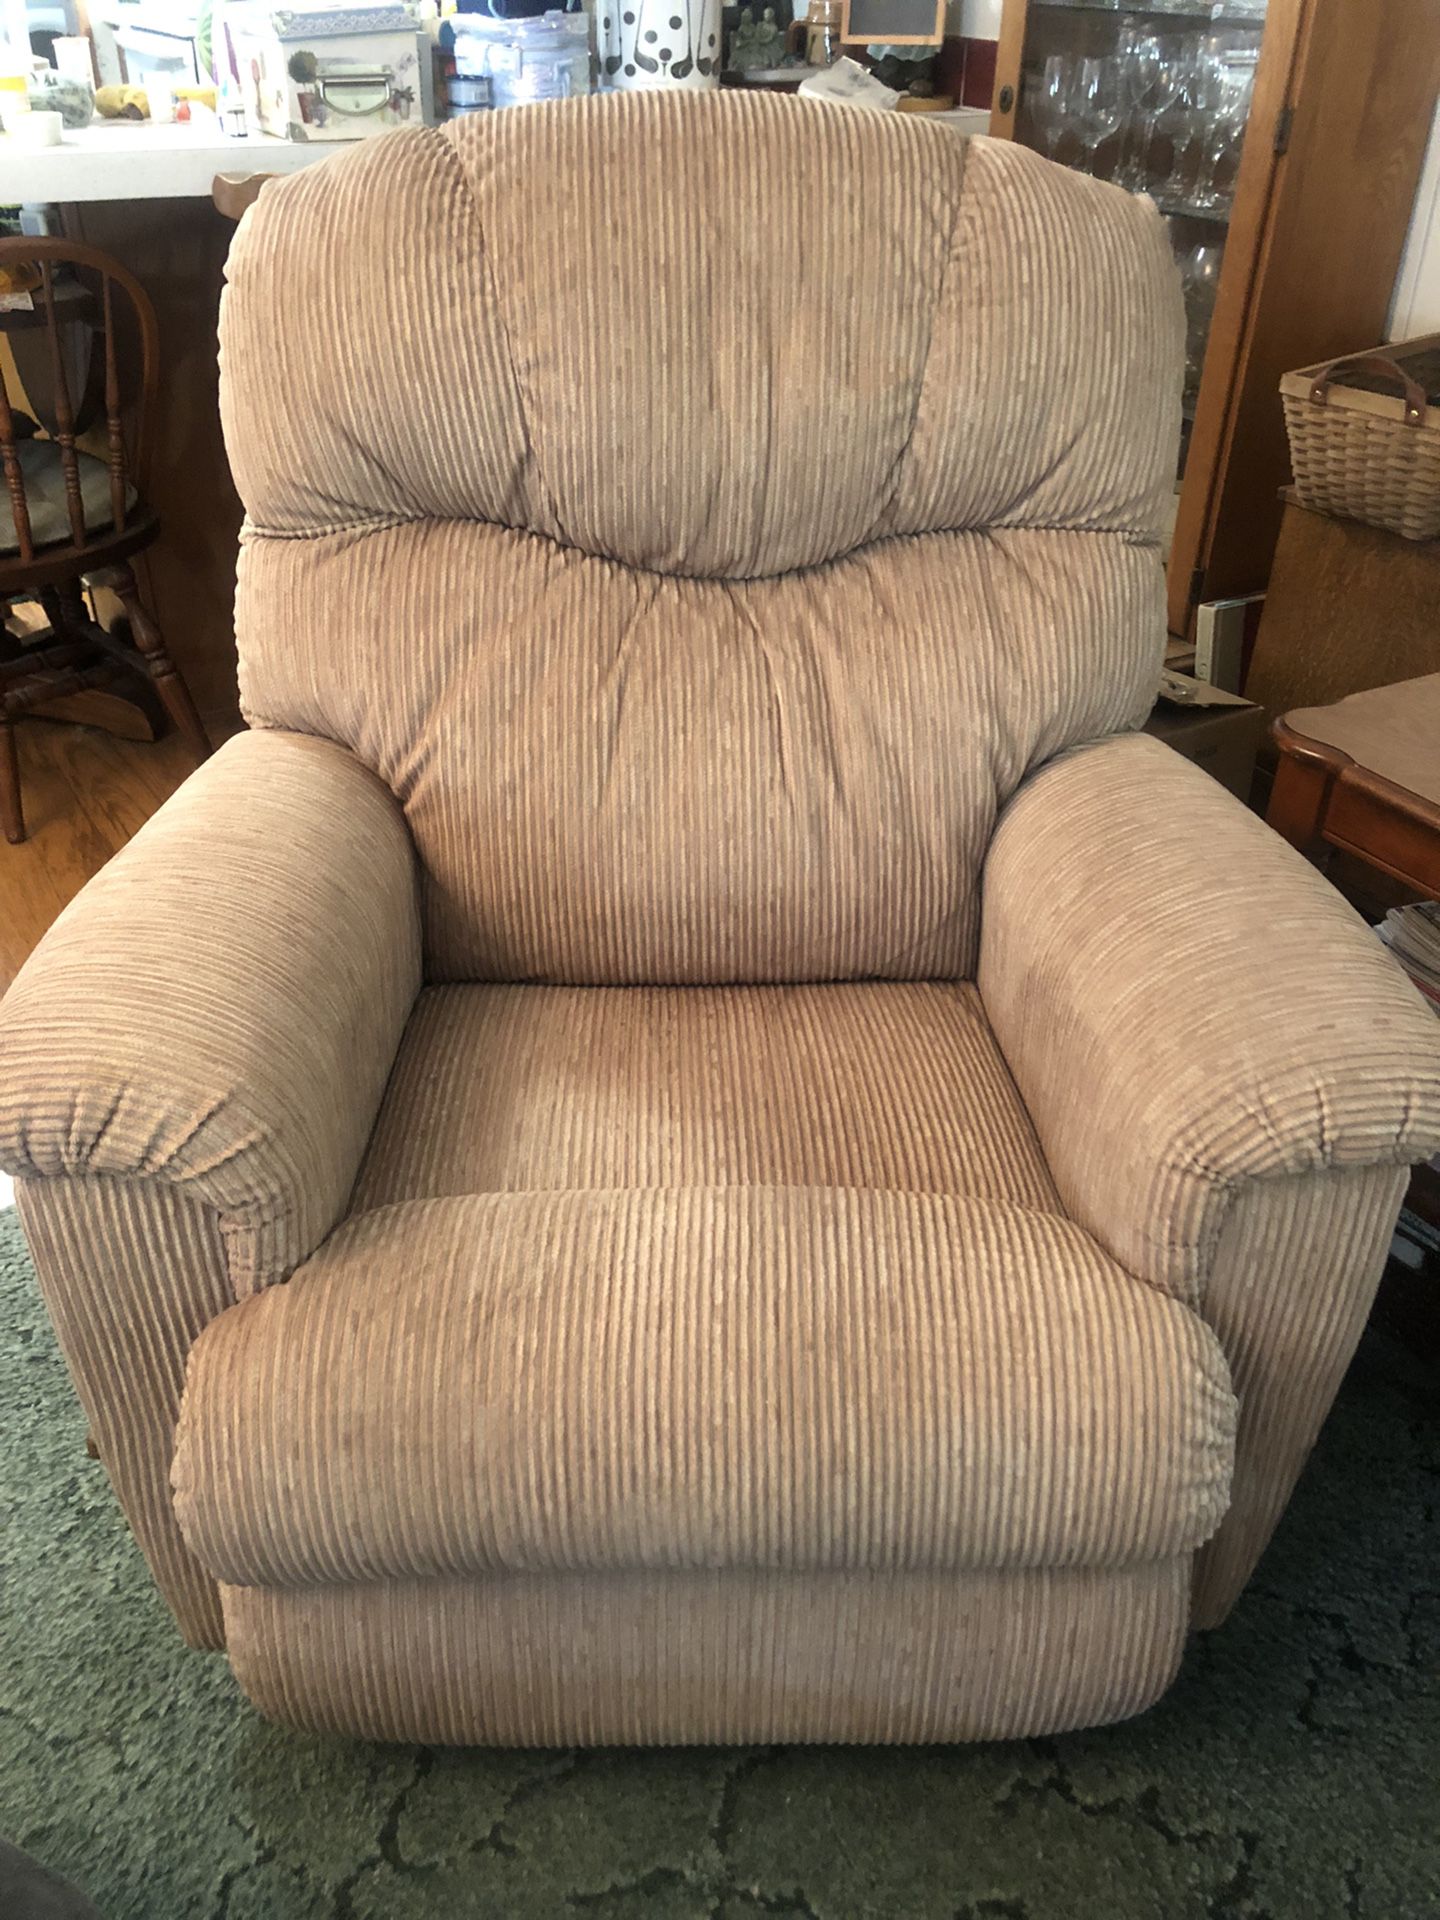 Lazy boy Recliner For Sale! 